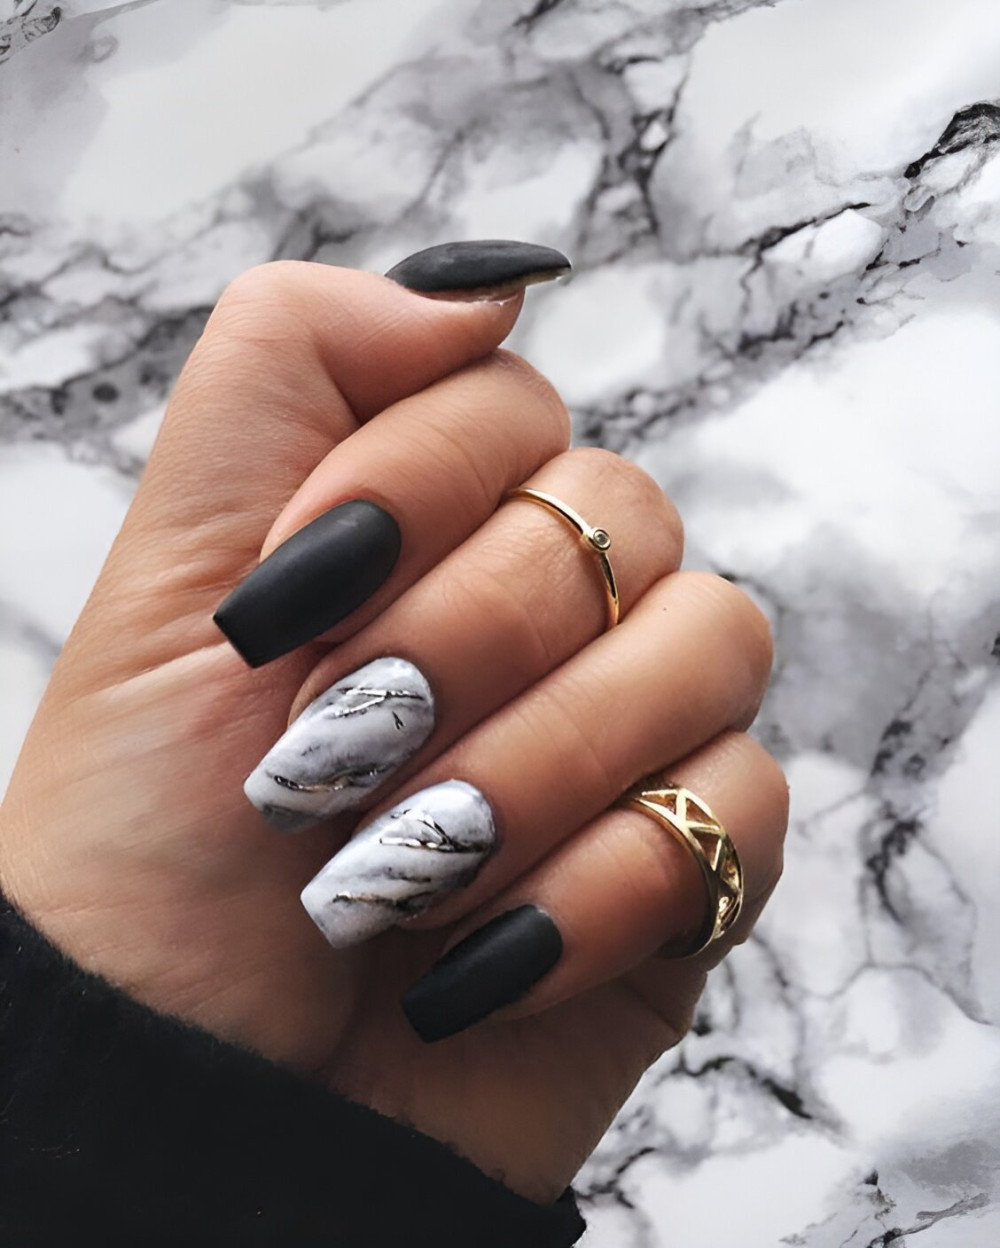 35 Breathtaking Nail Design Ideas For The Perfect Manicure - 279